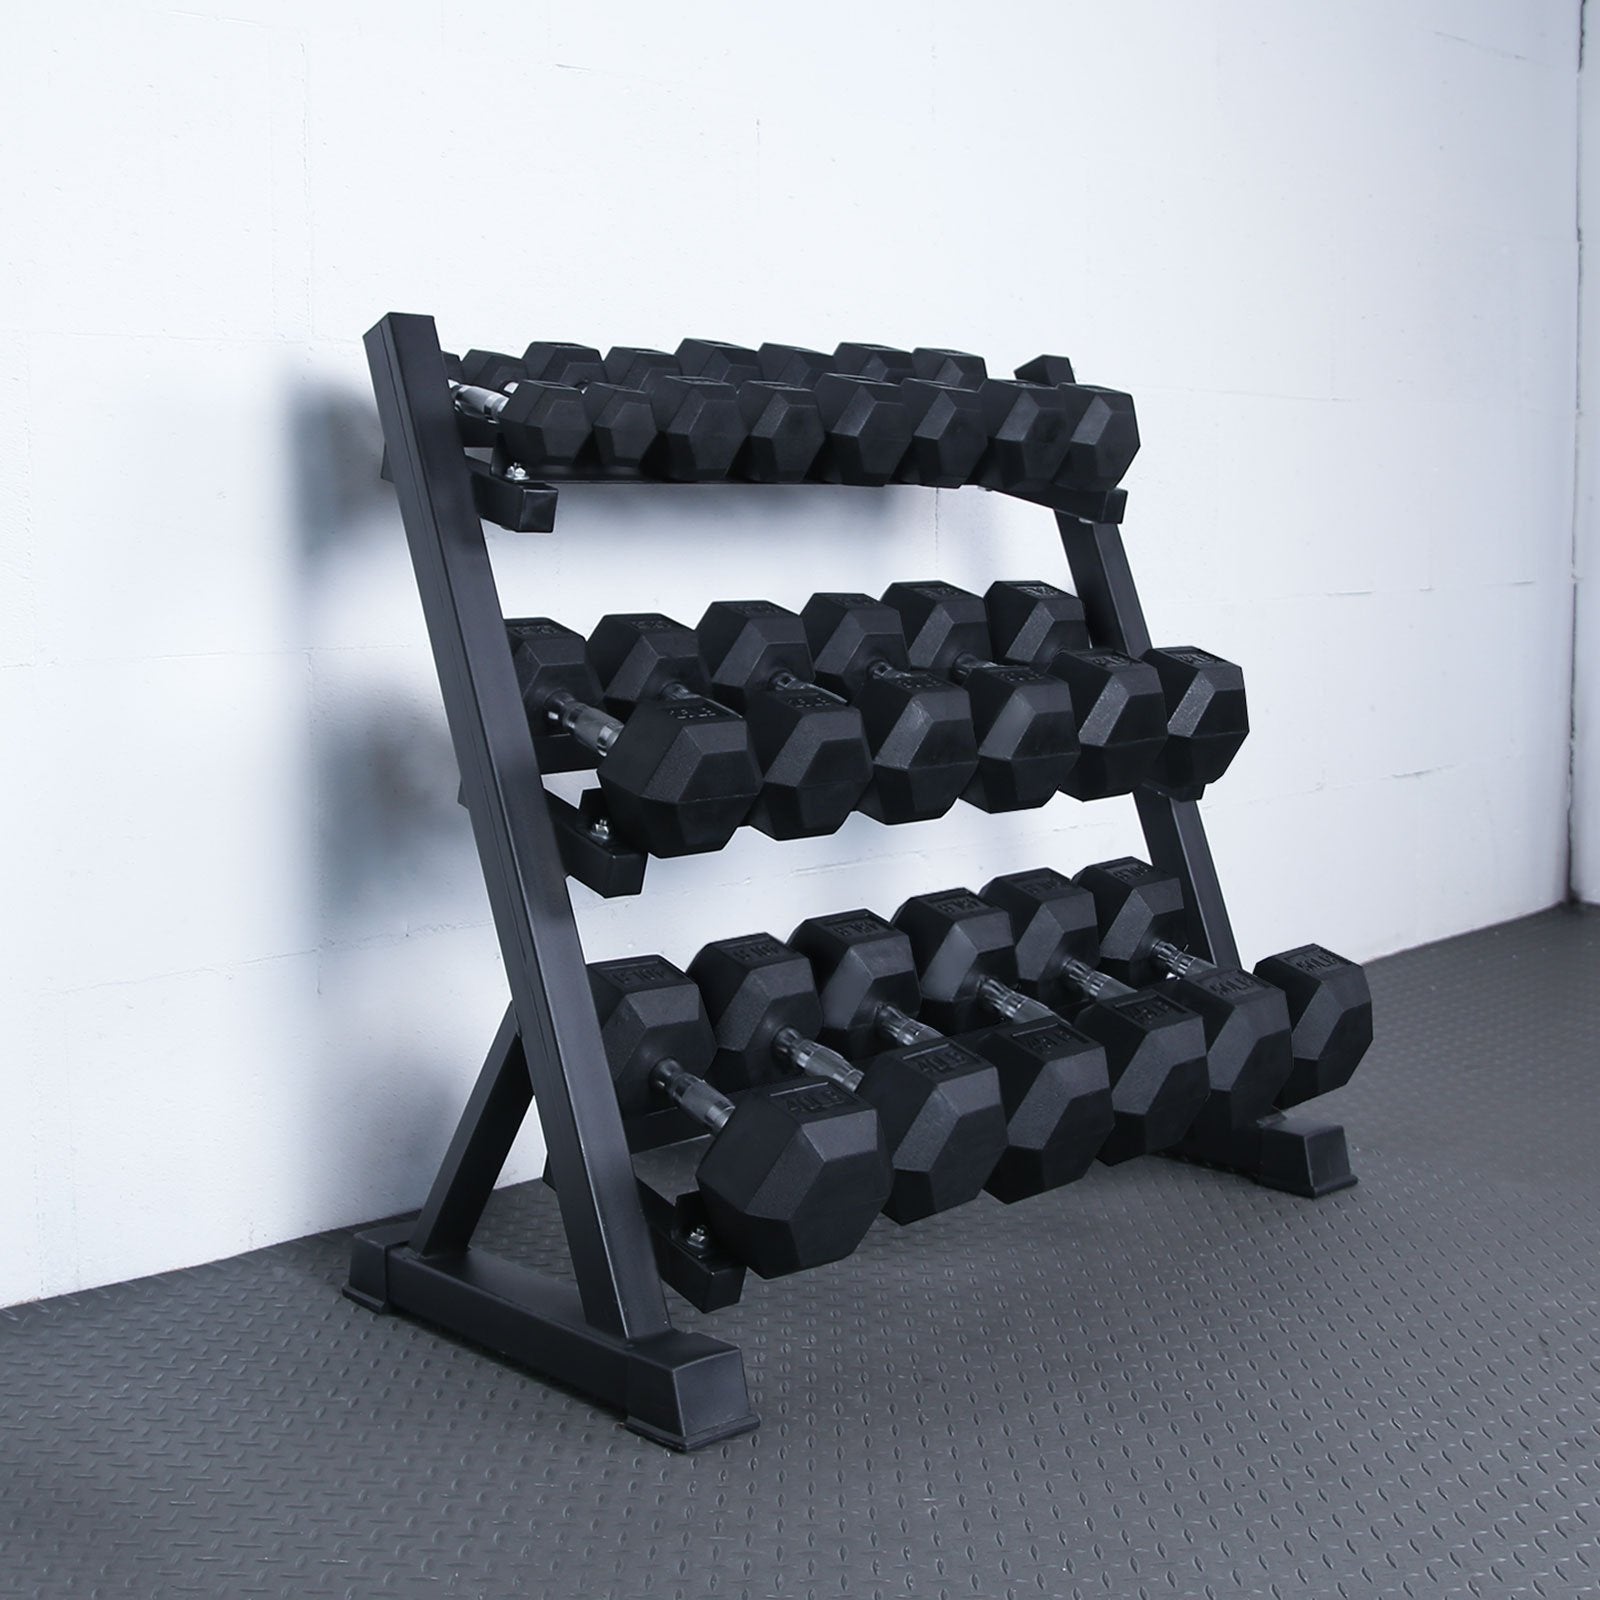 RitFit Rubber Hex Dumbbell Set with Rack 550LBS 10 Pairs